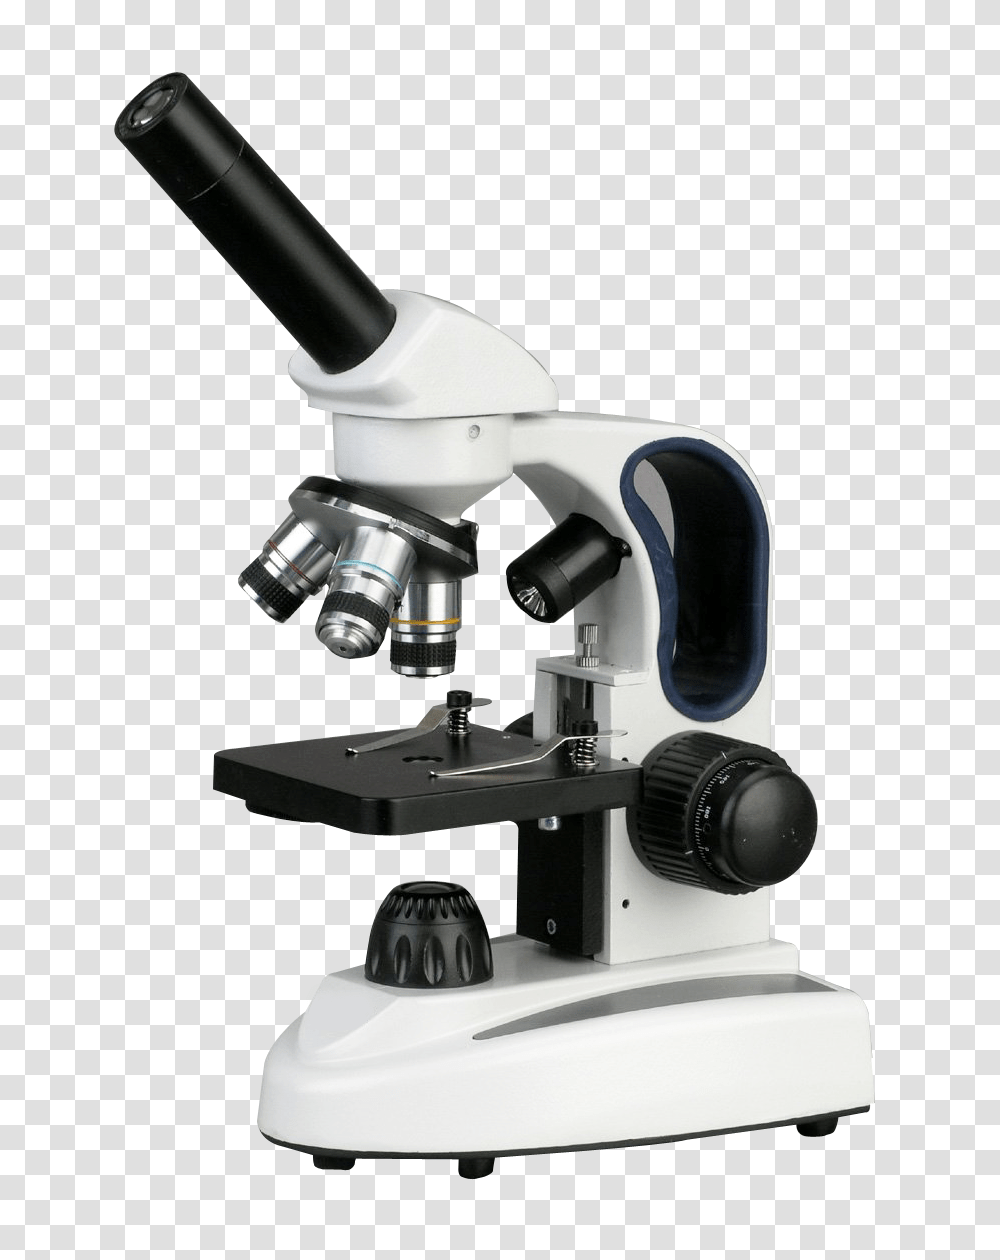 Microscope Image, Sink Faucet Transparent Png